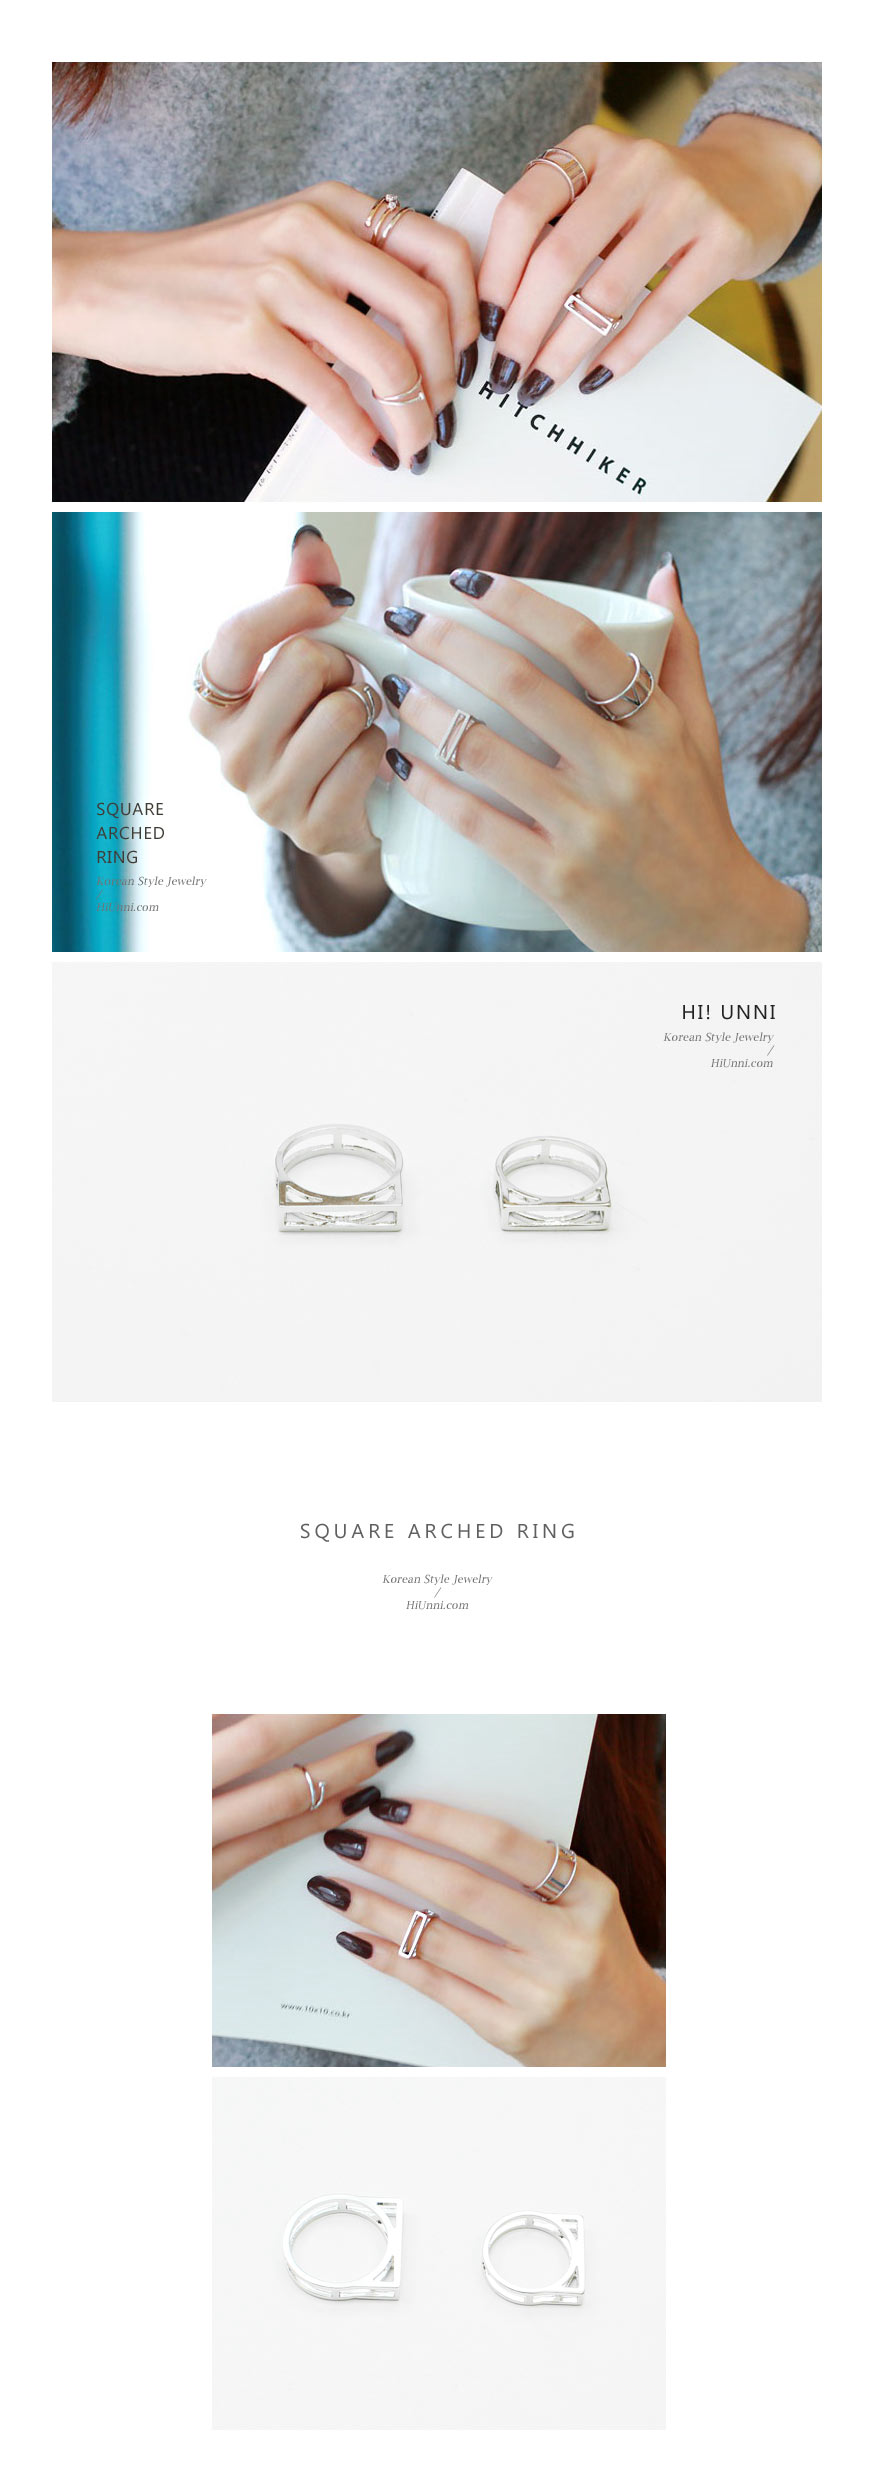 accessories_korean_asian_style_jewelry_trendy_square_arched_3